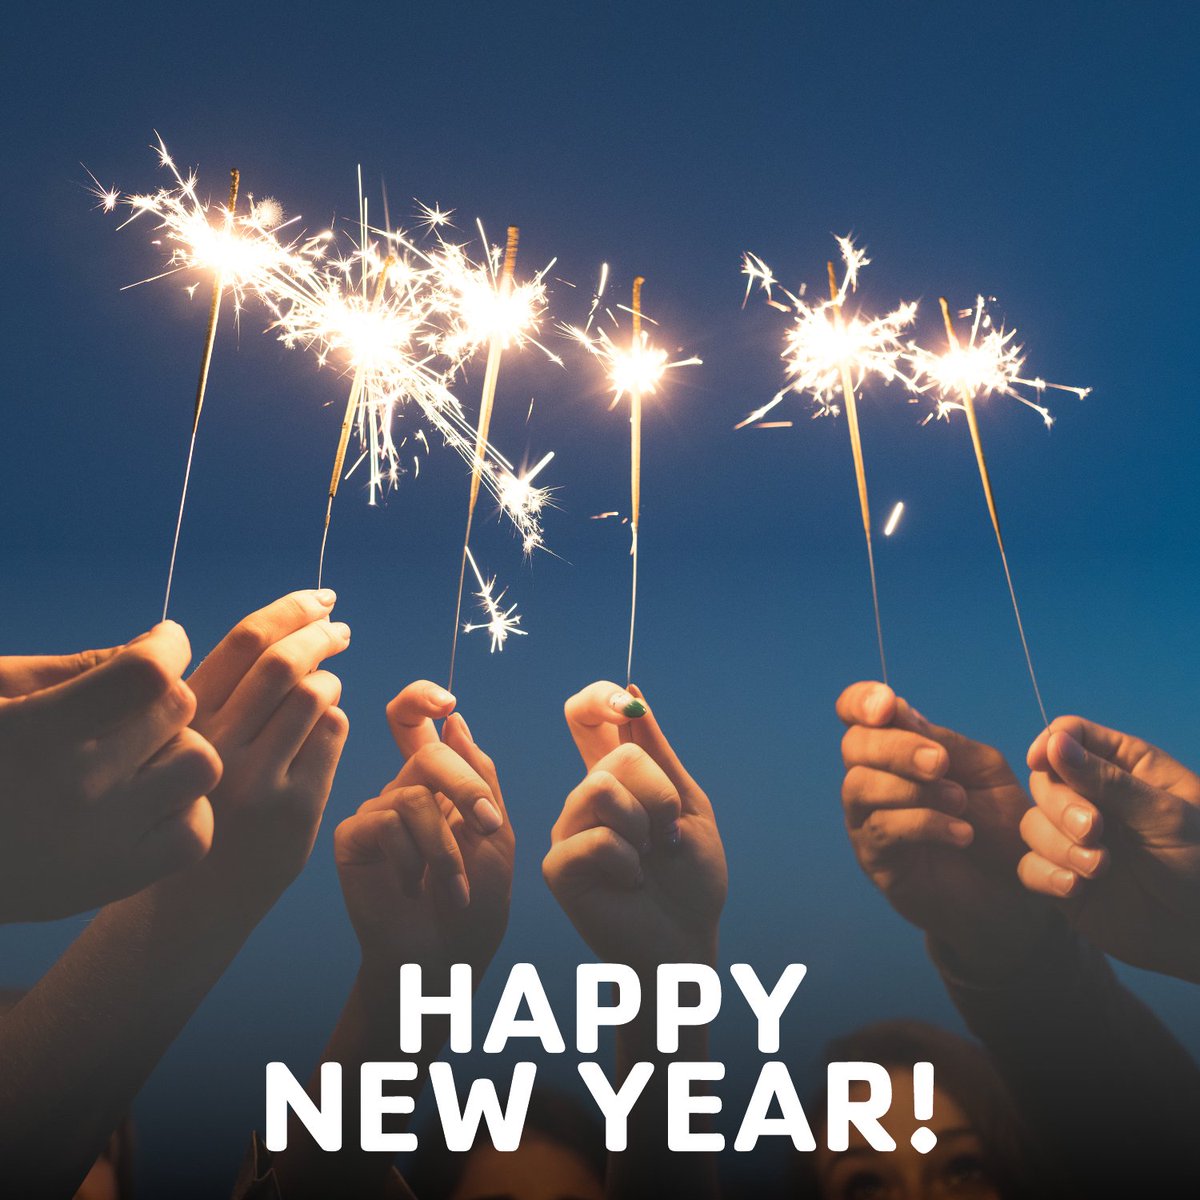 Wishing you a happy and safe New Year from all of us at the Y! May this year bring joy, good health, and exciting adventures. Thank you for making us a part of your community. Let's make 2024 amazing together. #HappyNewYear #NewBeginnings #CommunityCelebration